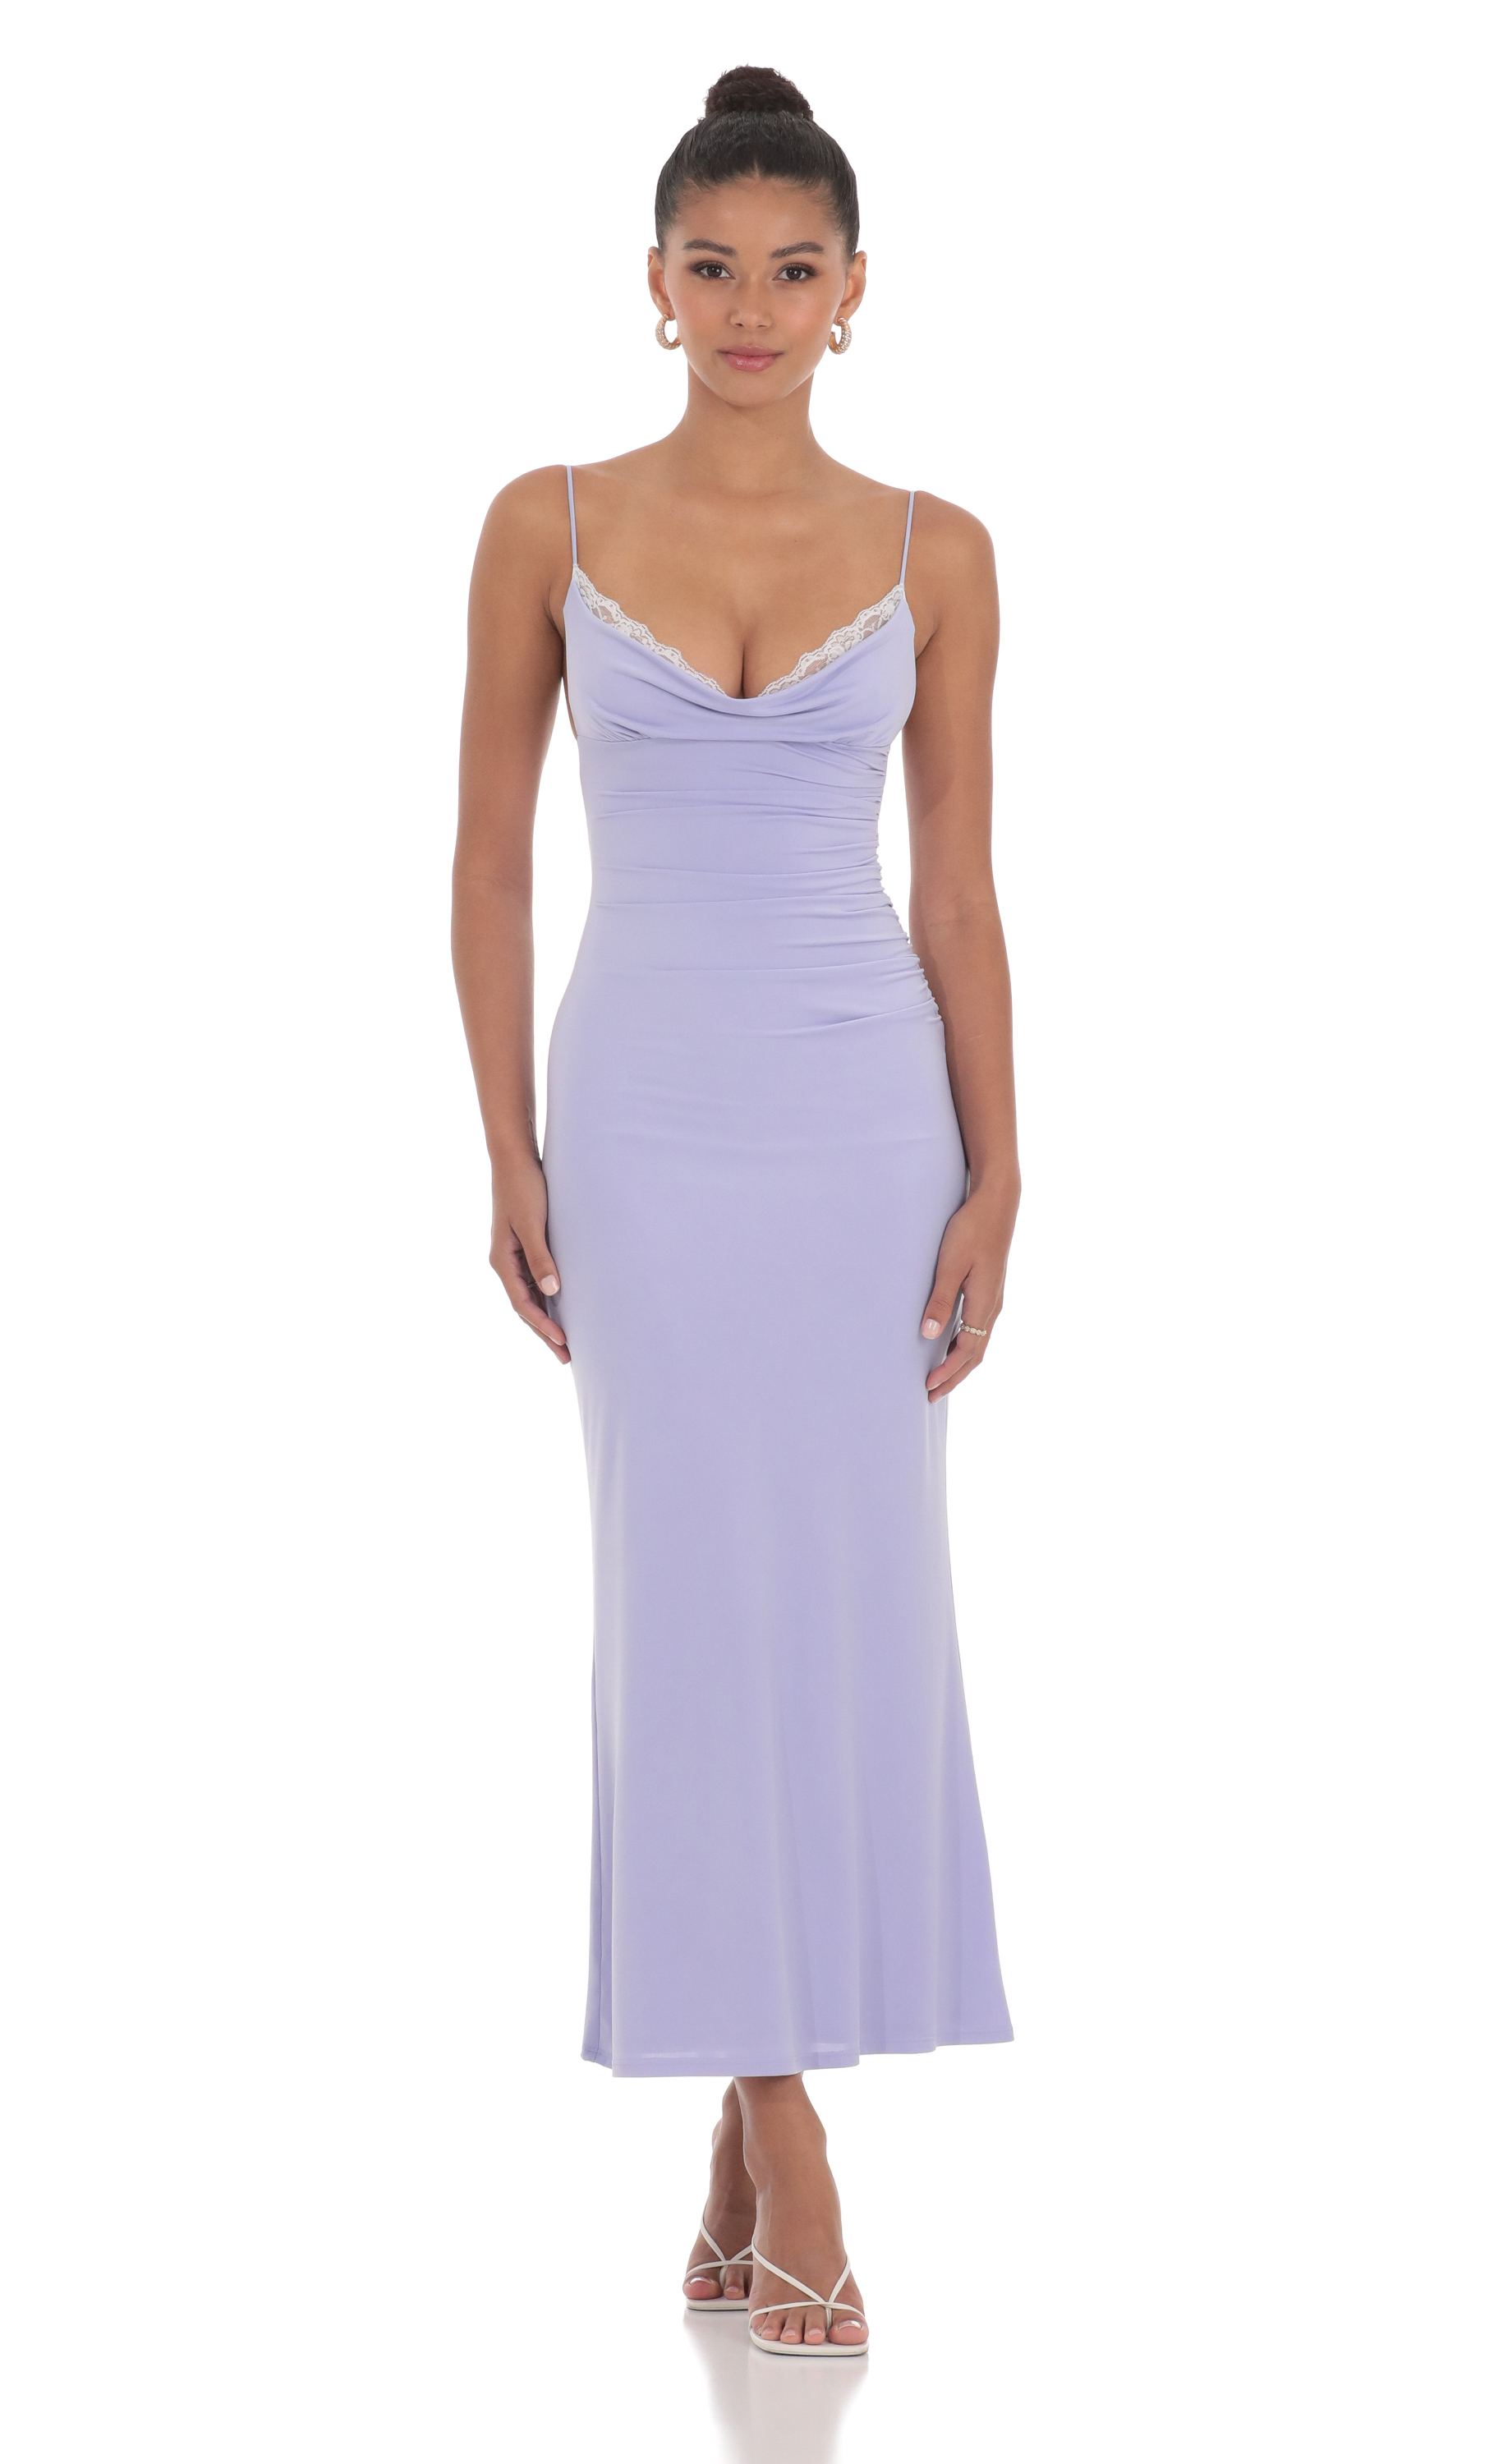 Ruched Cowl Neck Maxi Dress in Periwinkle